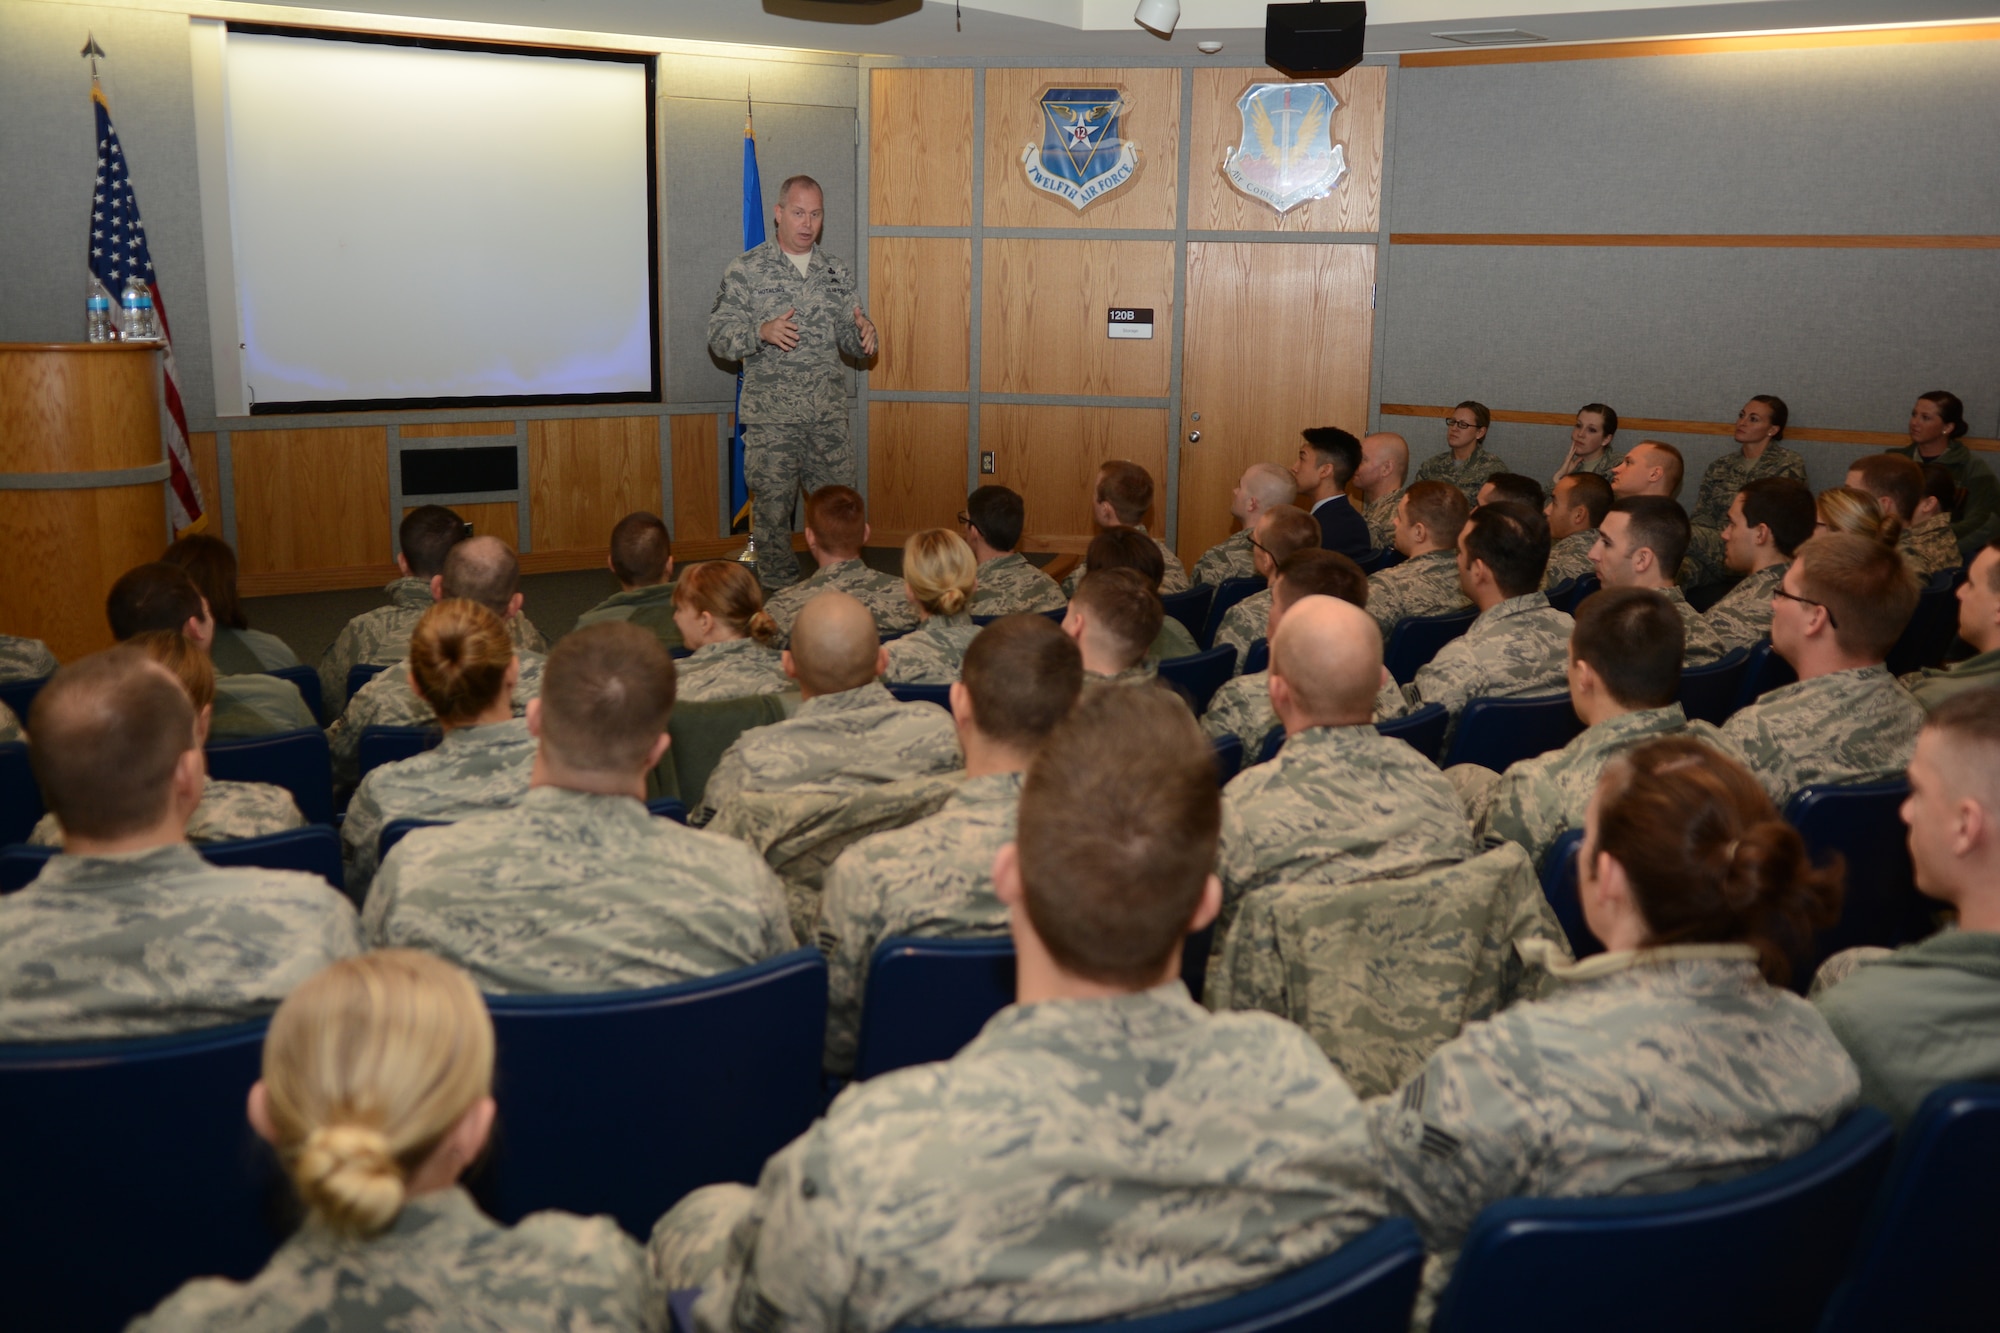 Chief Master Sgt. James W. Hotaling, Air National Guard command chief, speaks to Airmen of the 115th Fighter Wing in Madison, Wis., Dec. 6, 2015. He met with squadron commanders, Airmen of the Rising 6 and the senior enlisted members of the Top 3 to talk about various topics relating to Airmen of the ANG. (U.S. Air National Guard photo by Senior Airman Kyle P. Russell)